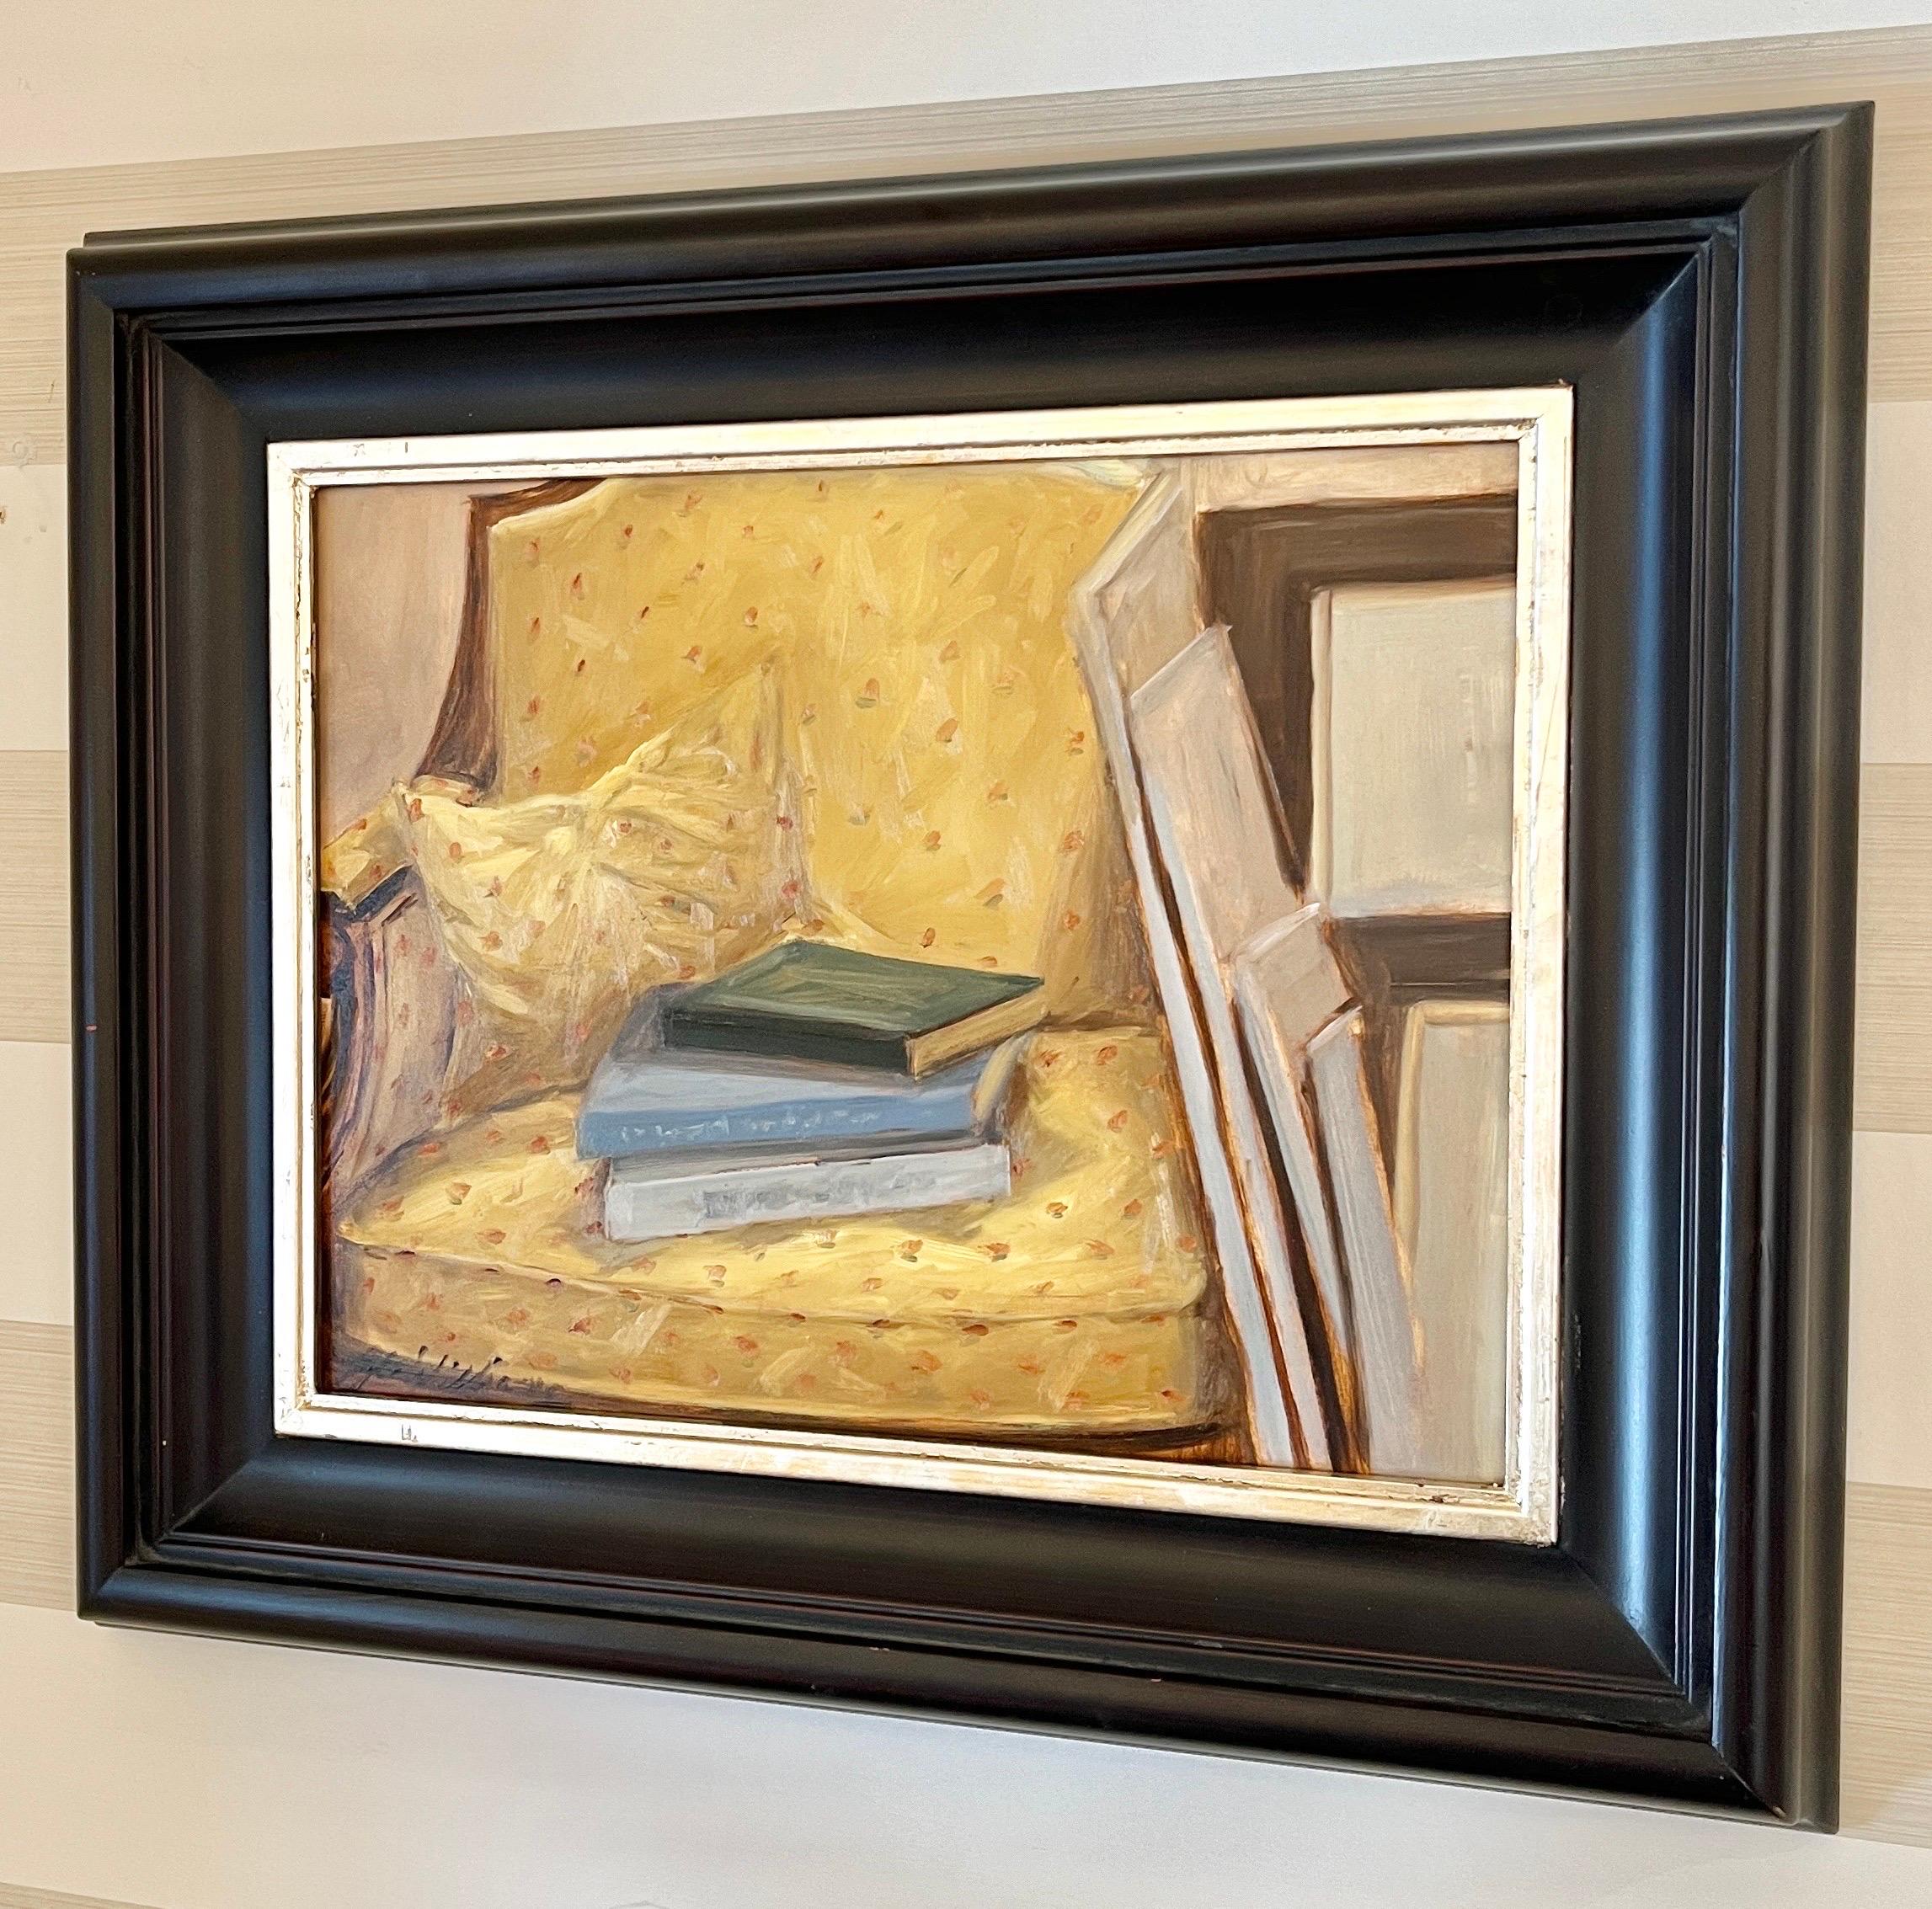  An original oil painting by GC Williams. This piece shows the artist's beloved studio chair, with books piled on it and canvases leaning against it.

Williams has a degree in art history which gave her an understanding of, and appreciation for, not